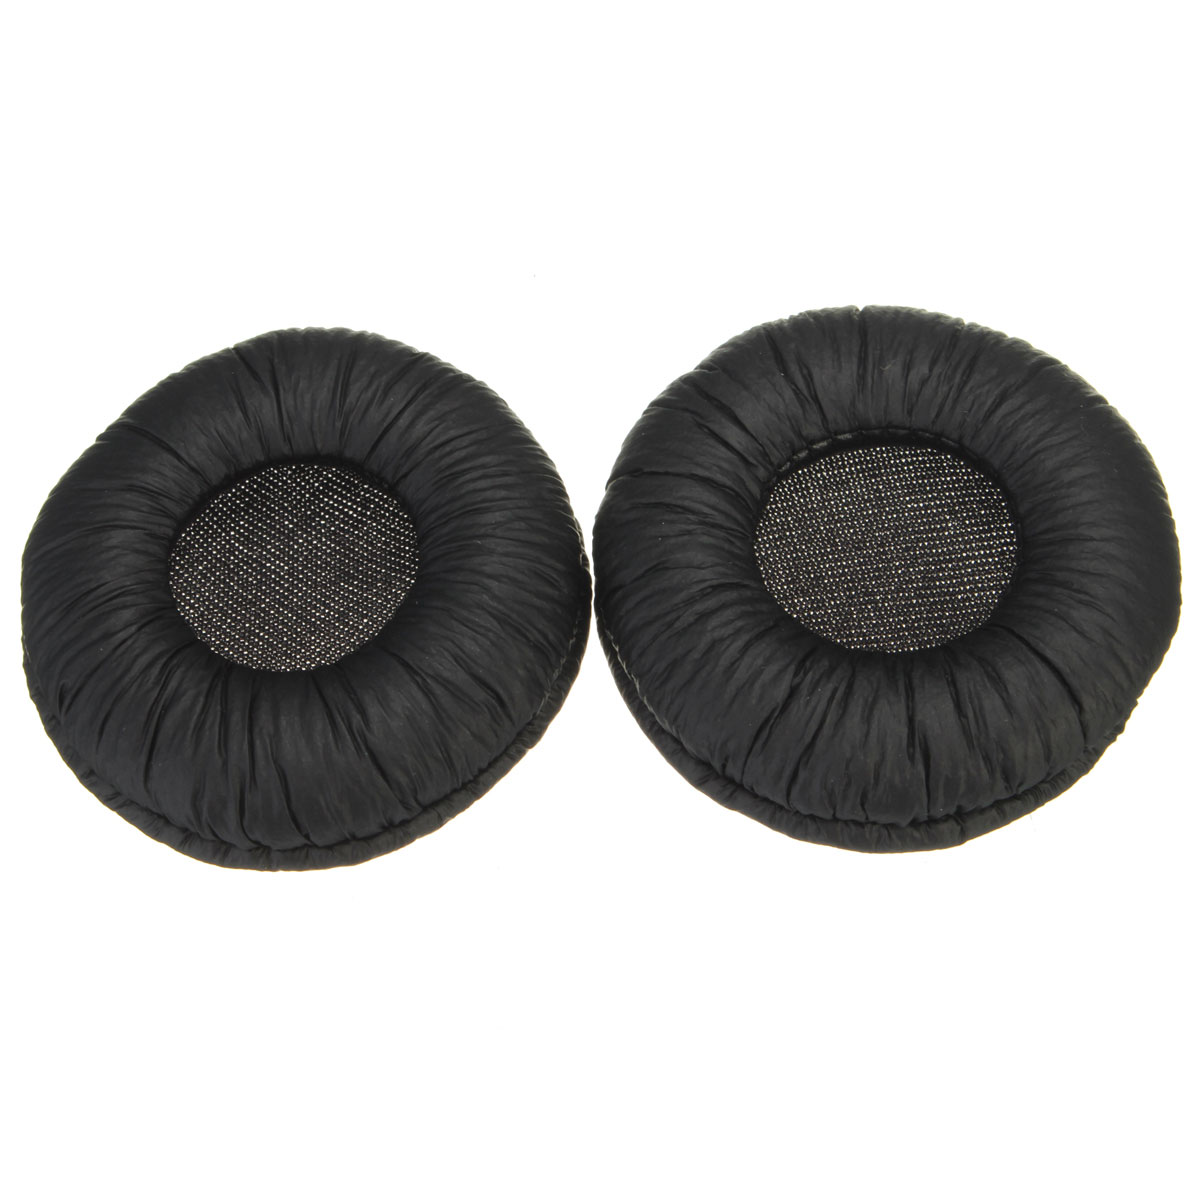 LEORY-1-Pair-For-Sennheiser-PX100-PX200-Headphone-Replacement-Ear-Pads-Cover-Headband-Cushion-1782024-3